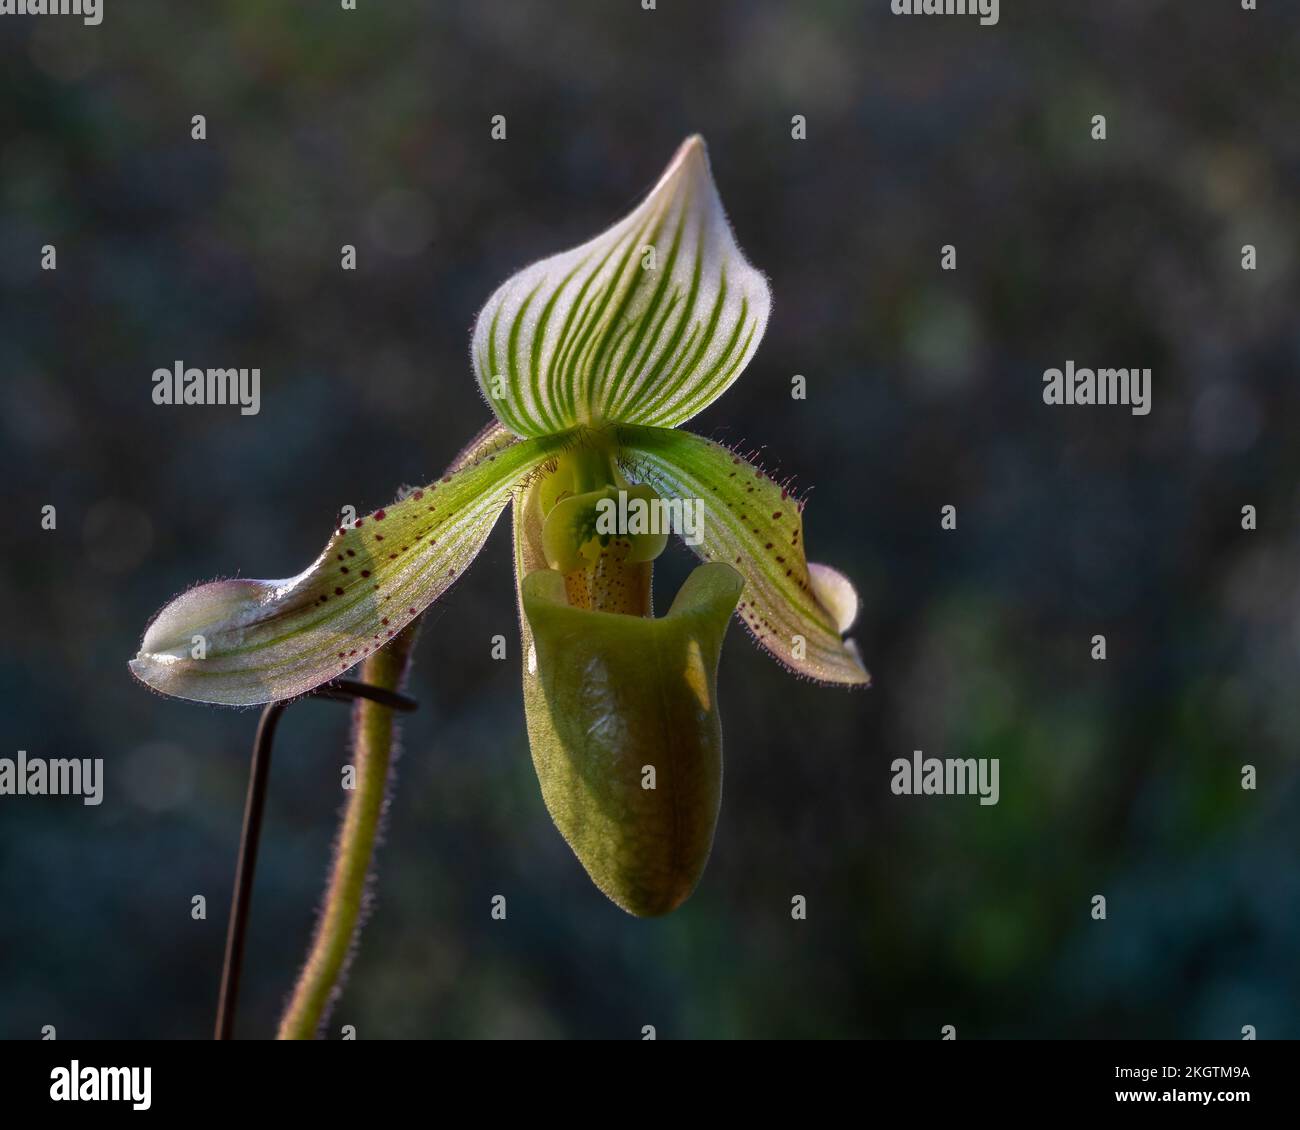 Closeup view of backlit green, white and purple flower of lady slipper orchid species paphiopedilum schoseri or bacanum isolated on natural background Stock Photo